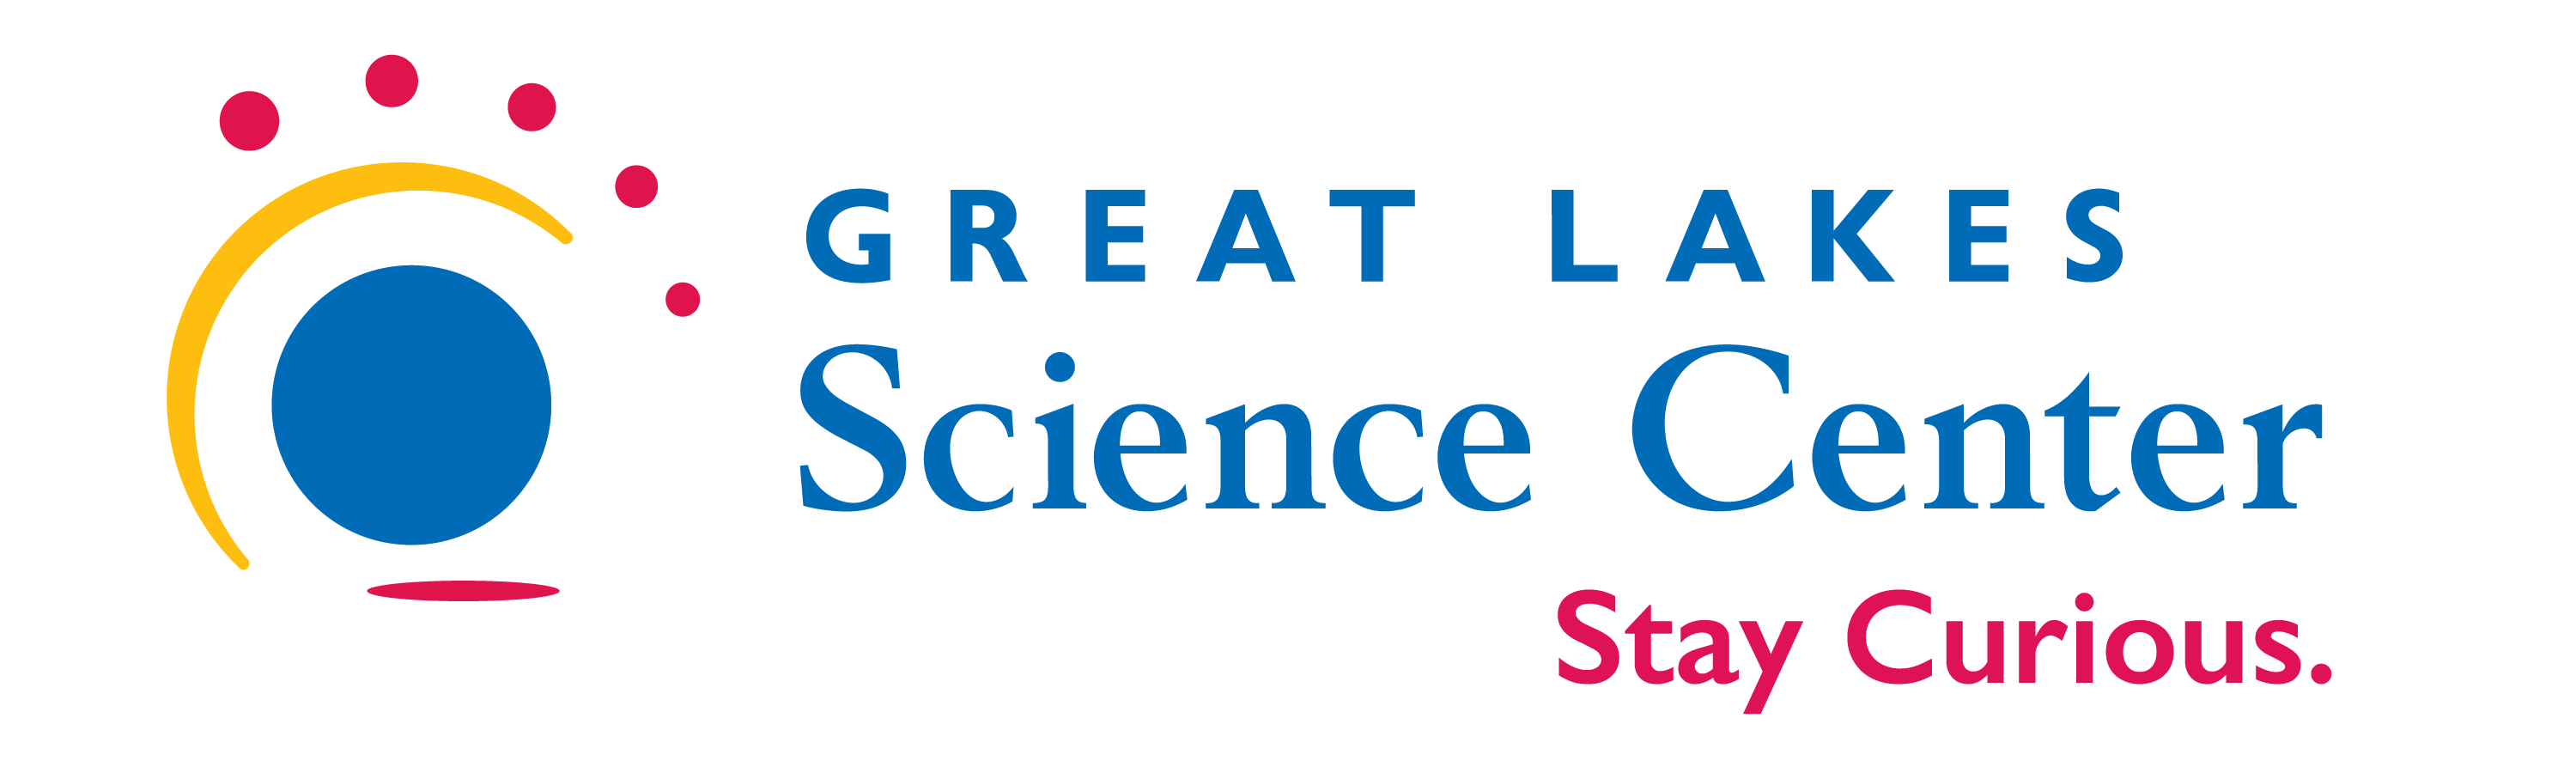 Great Lakes Science Center logo